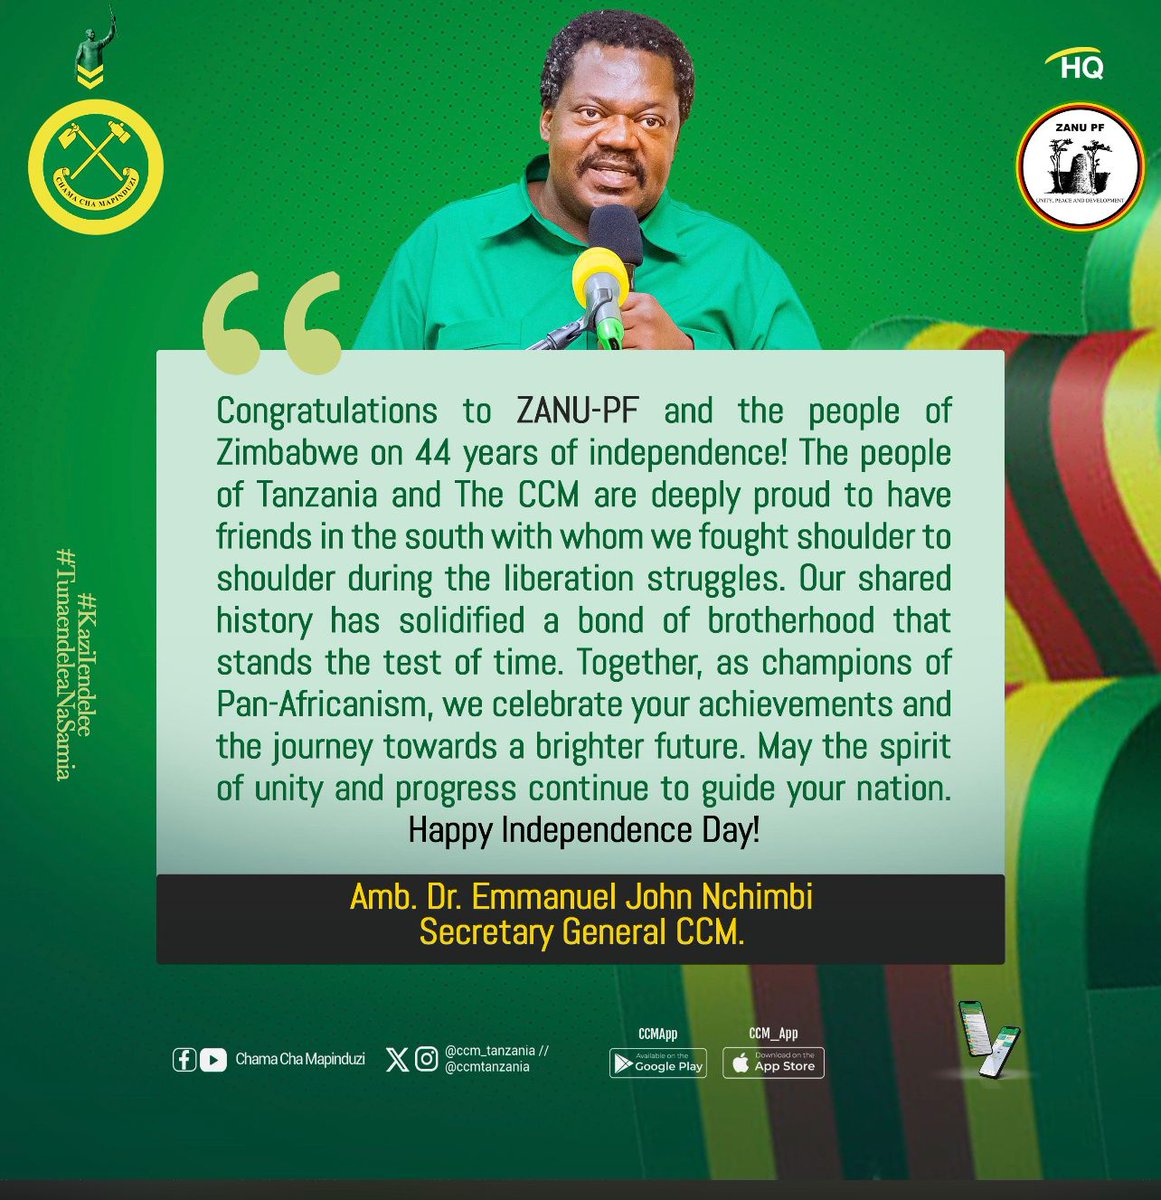 Our gratitude goes to the People of Tanzania and the Revolutionary @ccm_tanzania